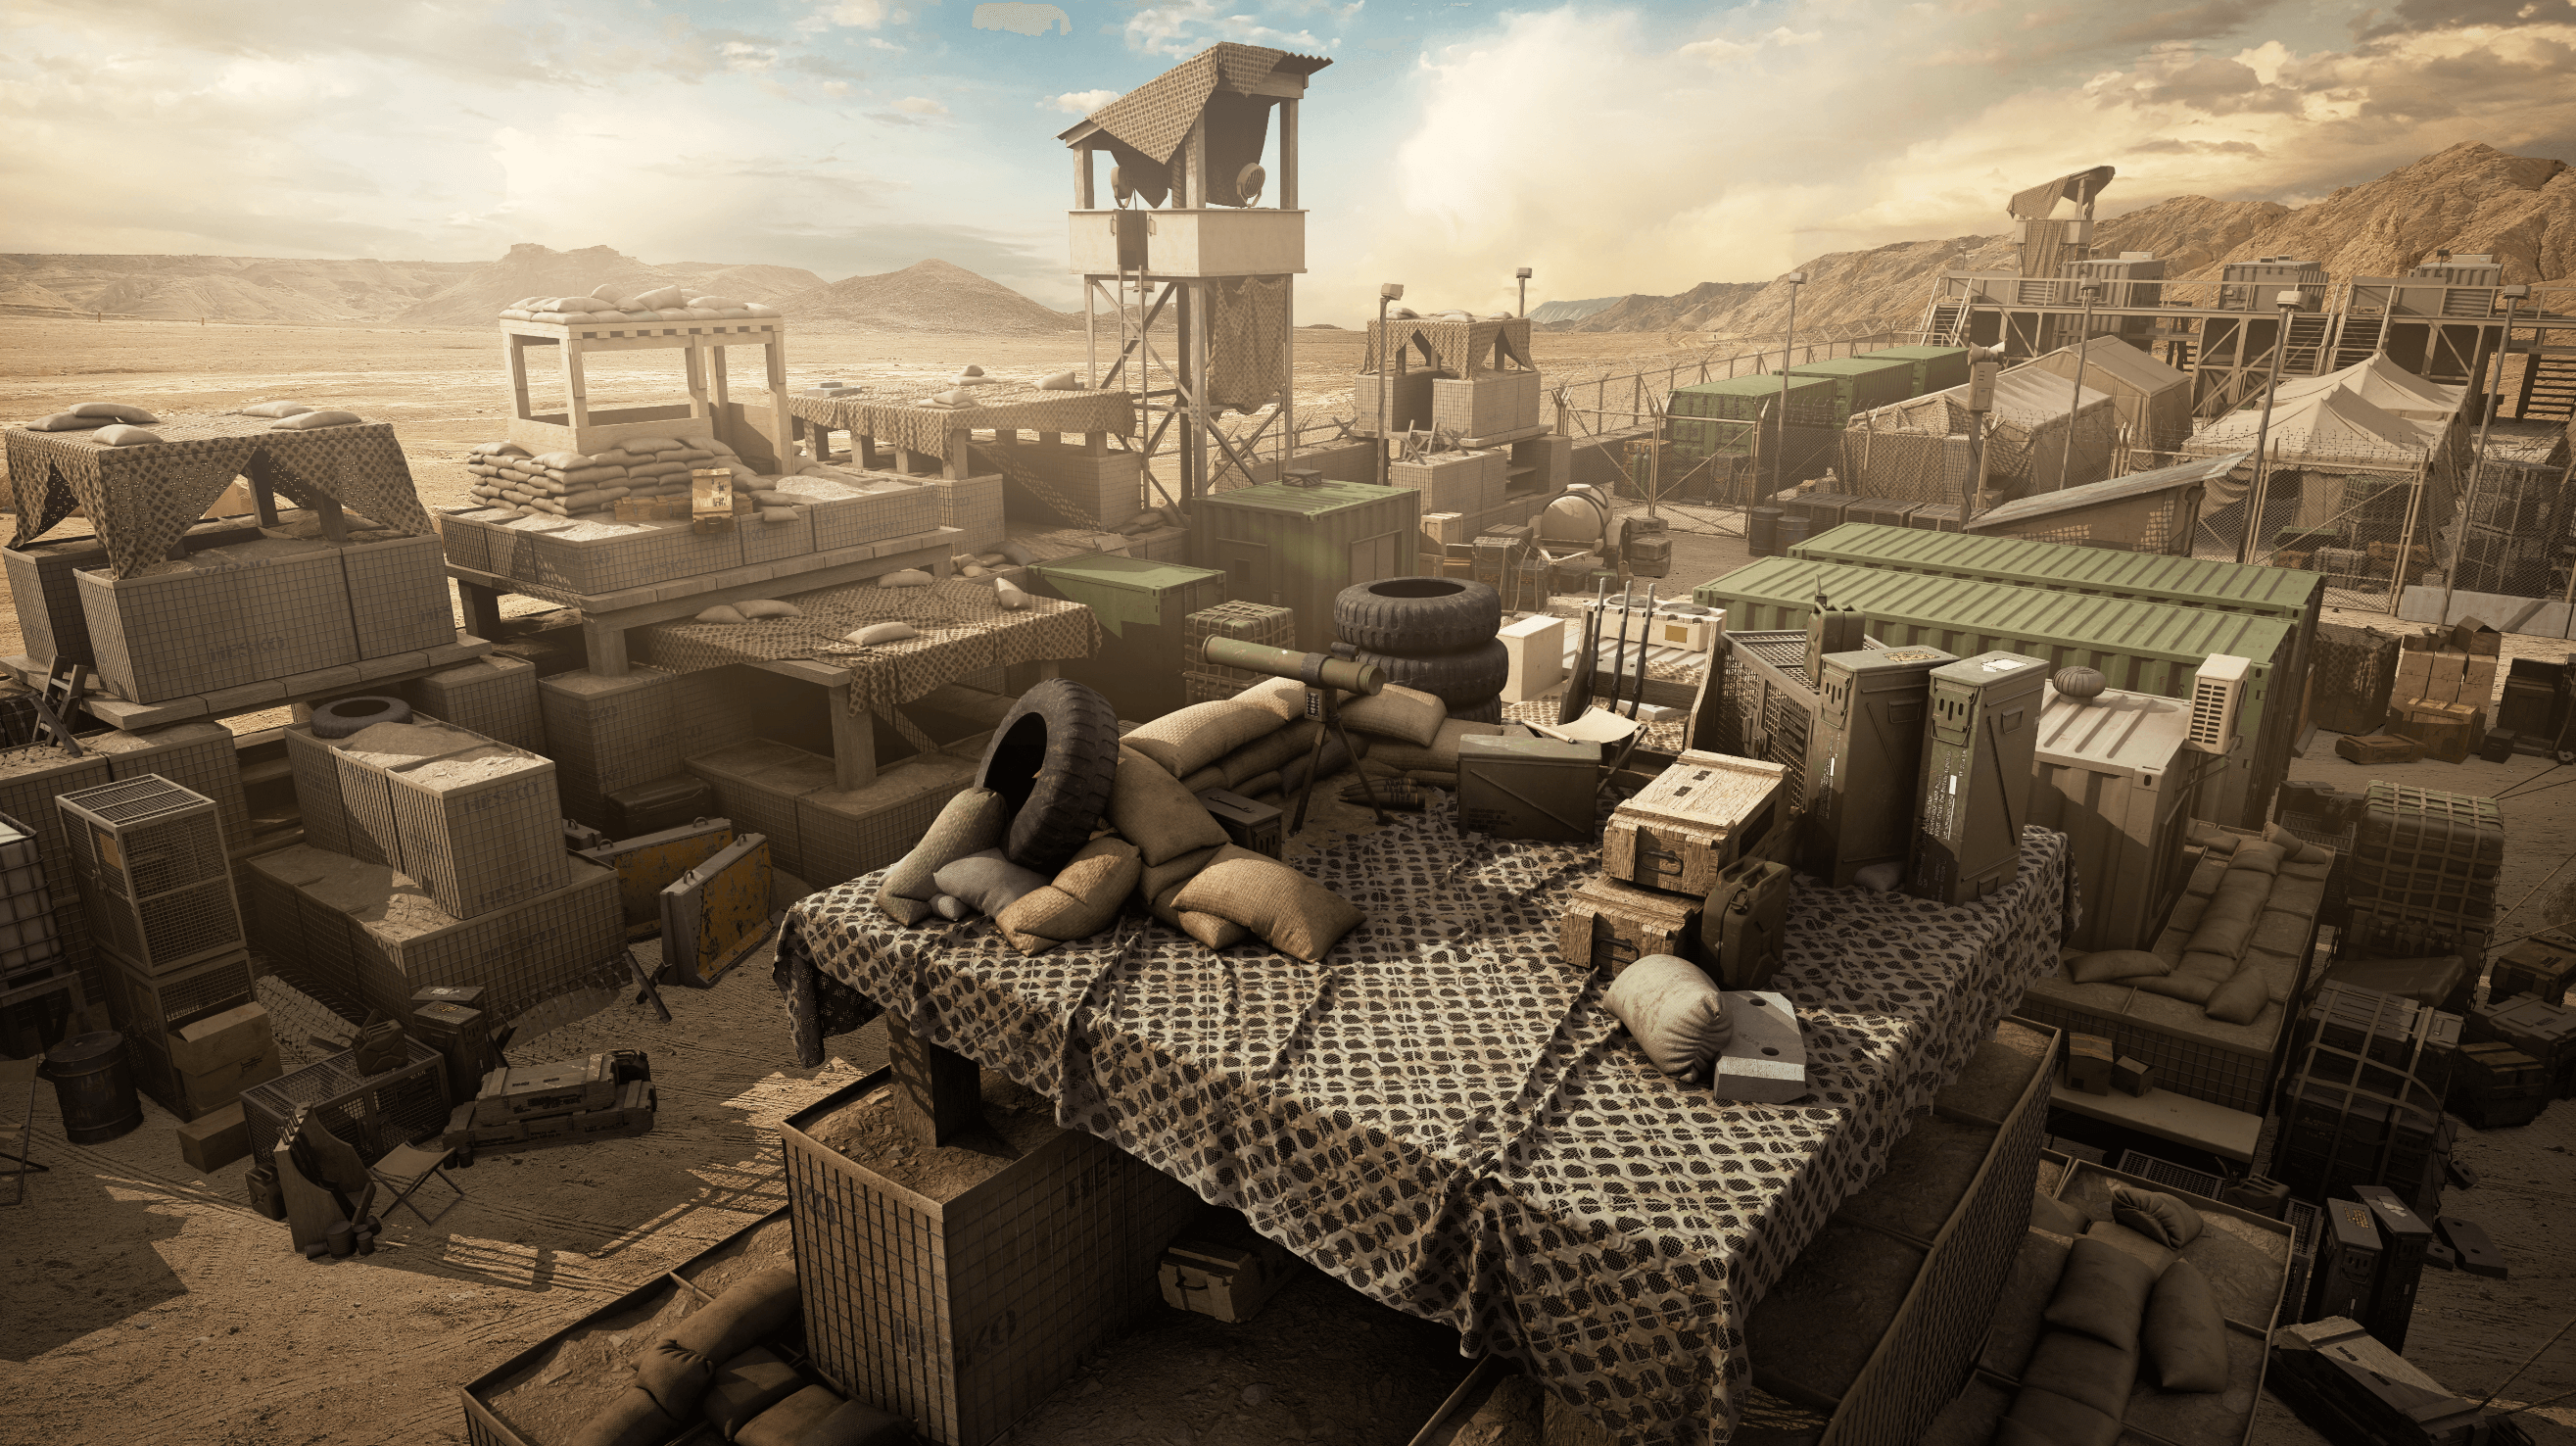 Military Outpost: From Concept to Texturing